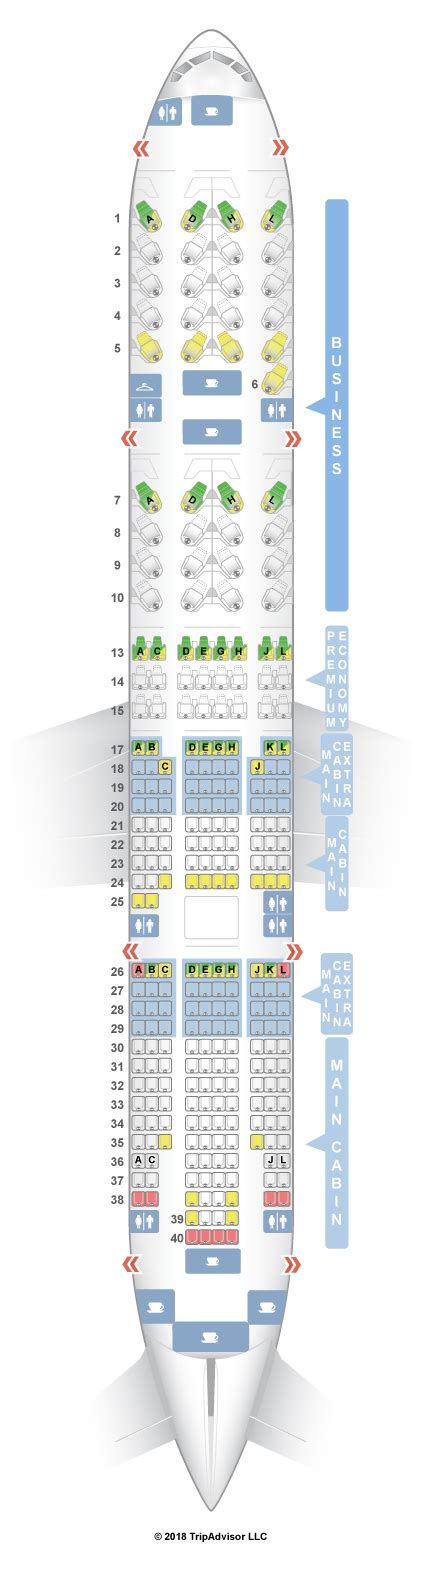 American airlines boeing 777 200er seat map - Planes & Seat Maps. Airbus A319 (319) Airbus A320 (320) Airbus A321 (321) Layout 1; Airbus A321 (321) Layout 2; Airbus A321 (32B) Layout 3 ; Airbus A321neo ACF; Airbus A330-200 (332) Boeing 737 MAX 8 (7M8) Boeing 737-800 (738) Layout 1; Boeing 737-800 (738) Layout 2; Boeing 777-200 (777) Boeing 777-300ER (77W) Boeing 787-8 (788) Boeing 787-9 (789) 